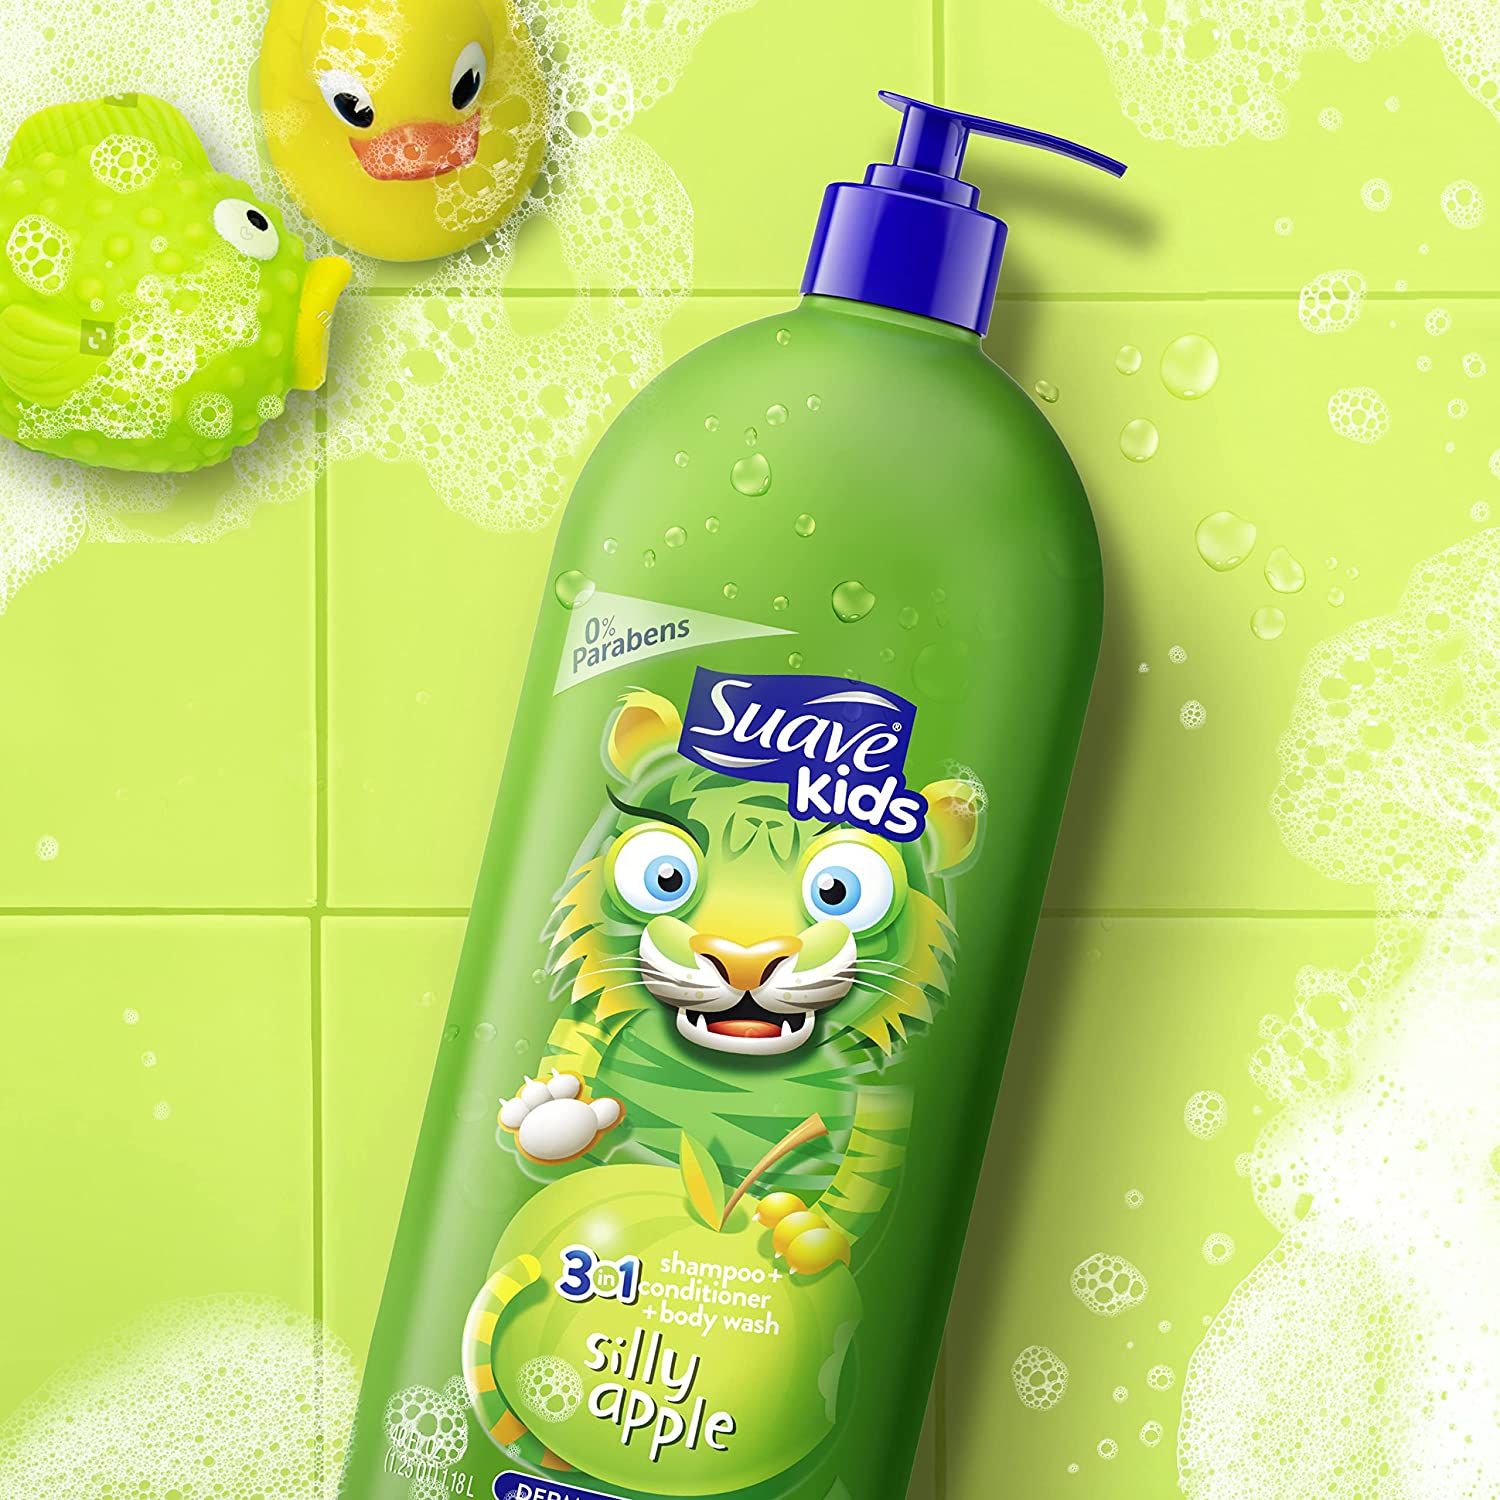 Suave Kids 3in1 Shampoo + Conditioner + Body Wash Silly Apple 532ml Green - Baby Moo